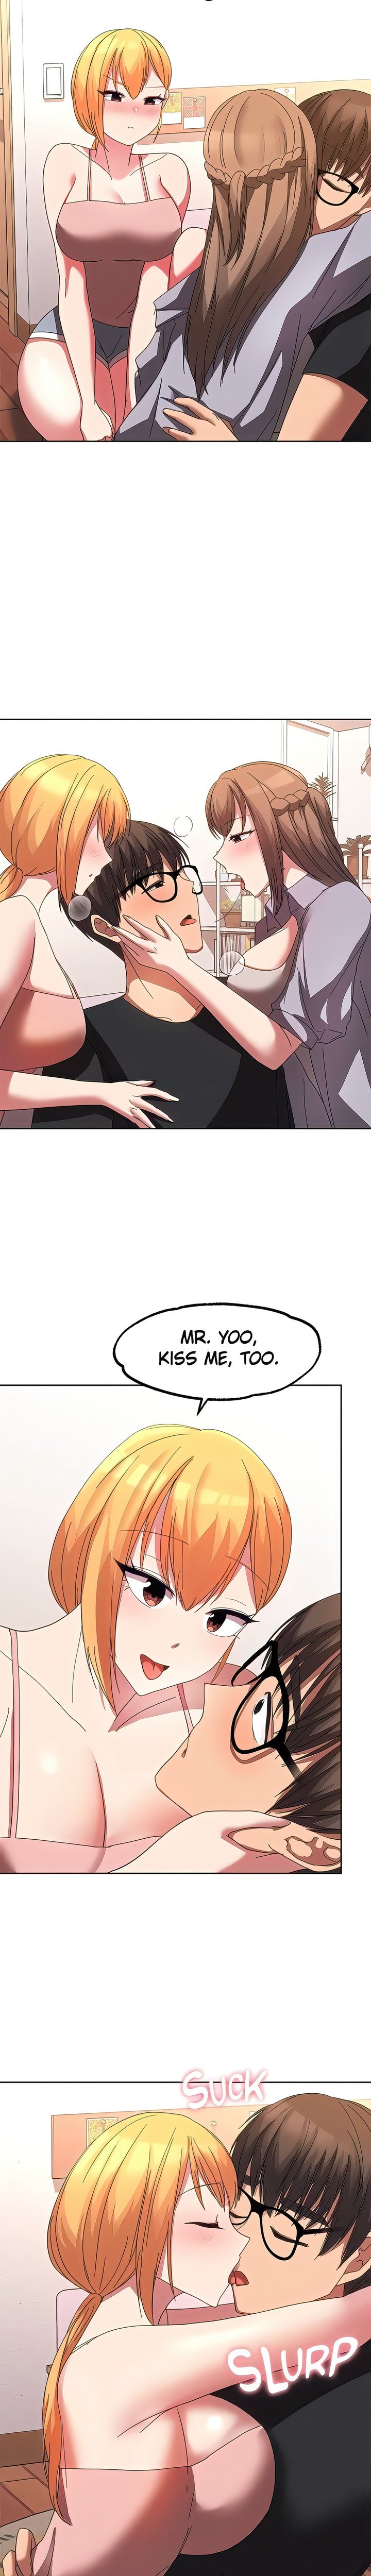 girls-i-used-to-teach-chap-31-18